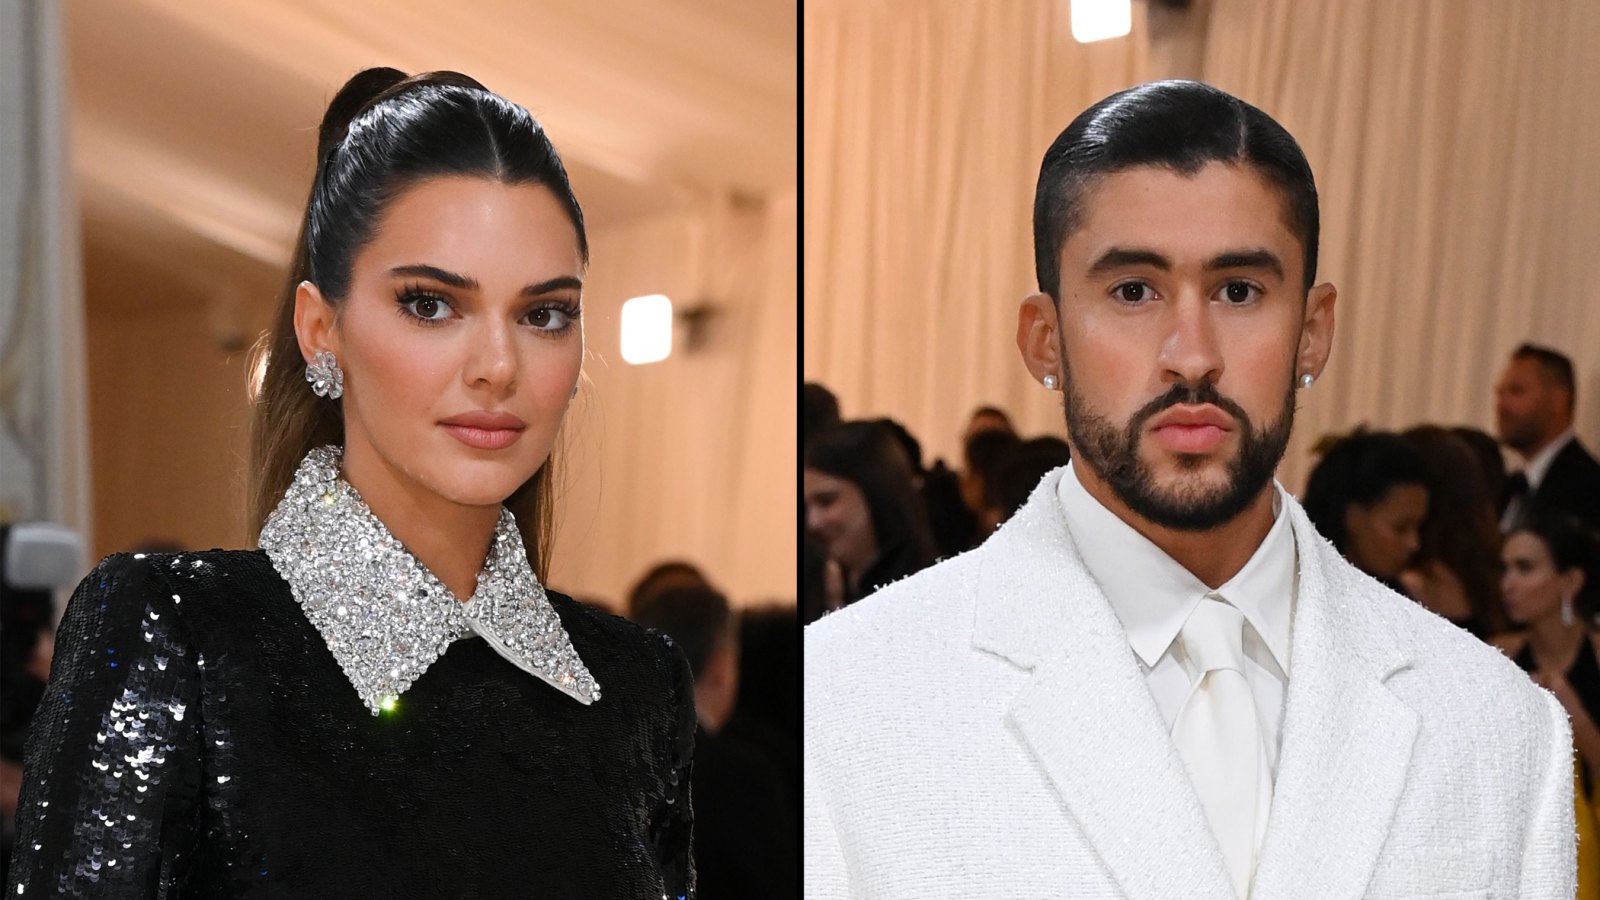 Kendall Jenner Sees Long-Term Potential With Bad Bunny